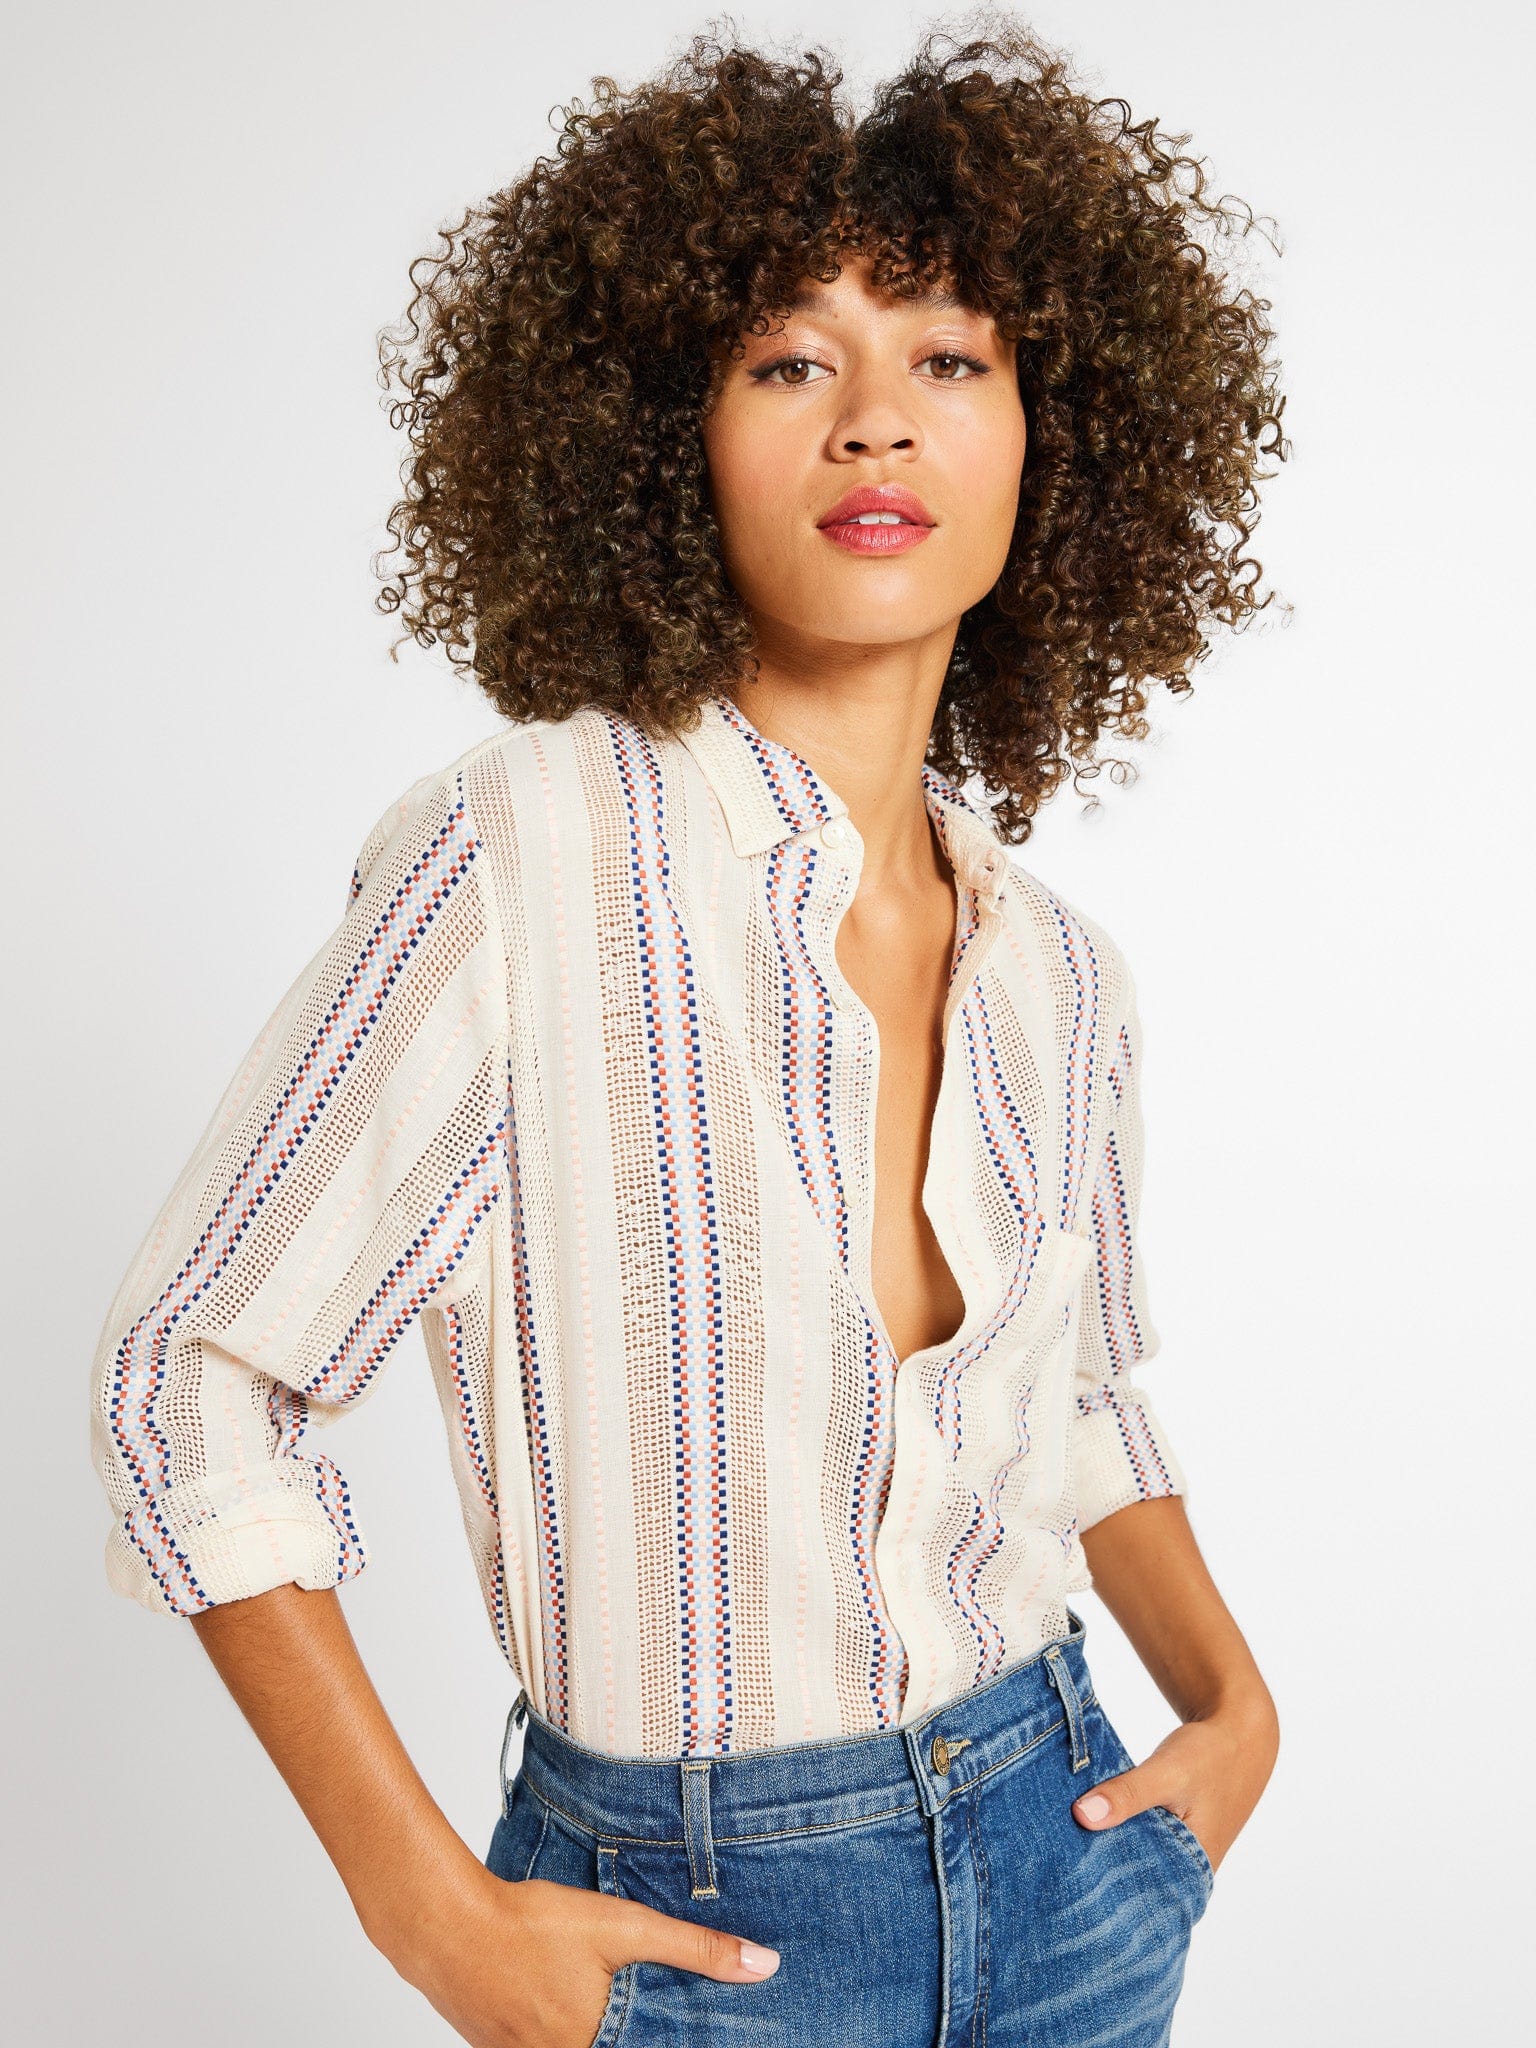 MILLE Clothing Sofia Top in O'Keeffe Stripe